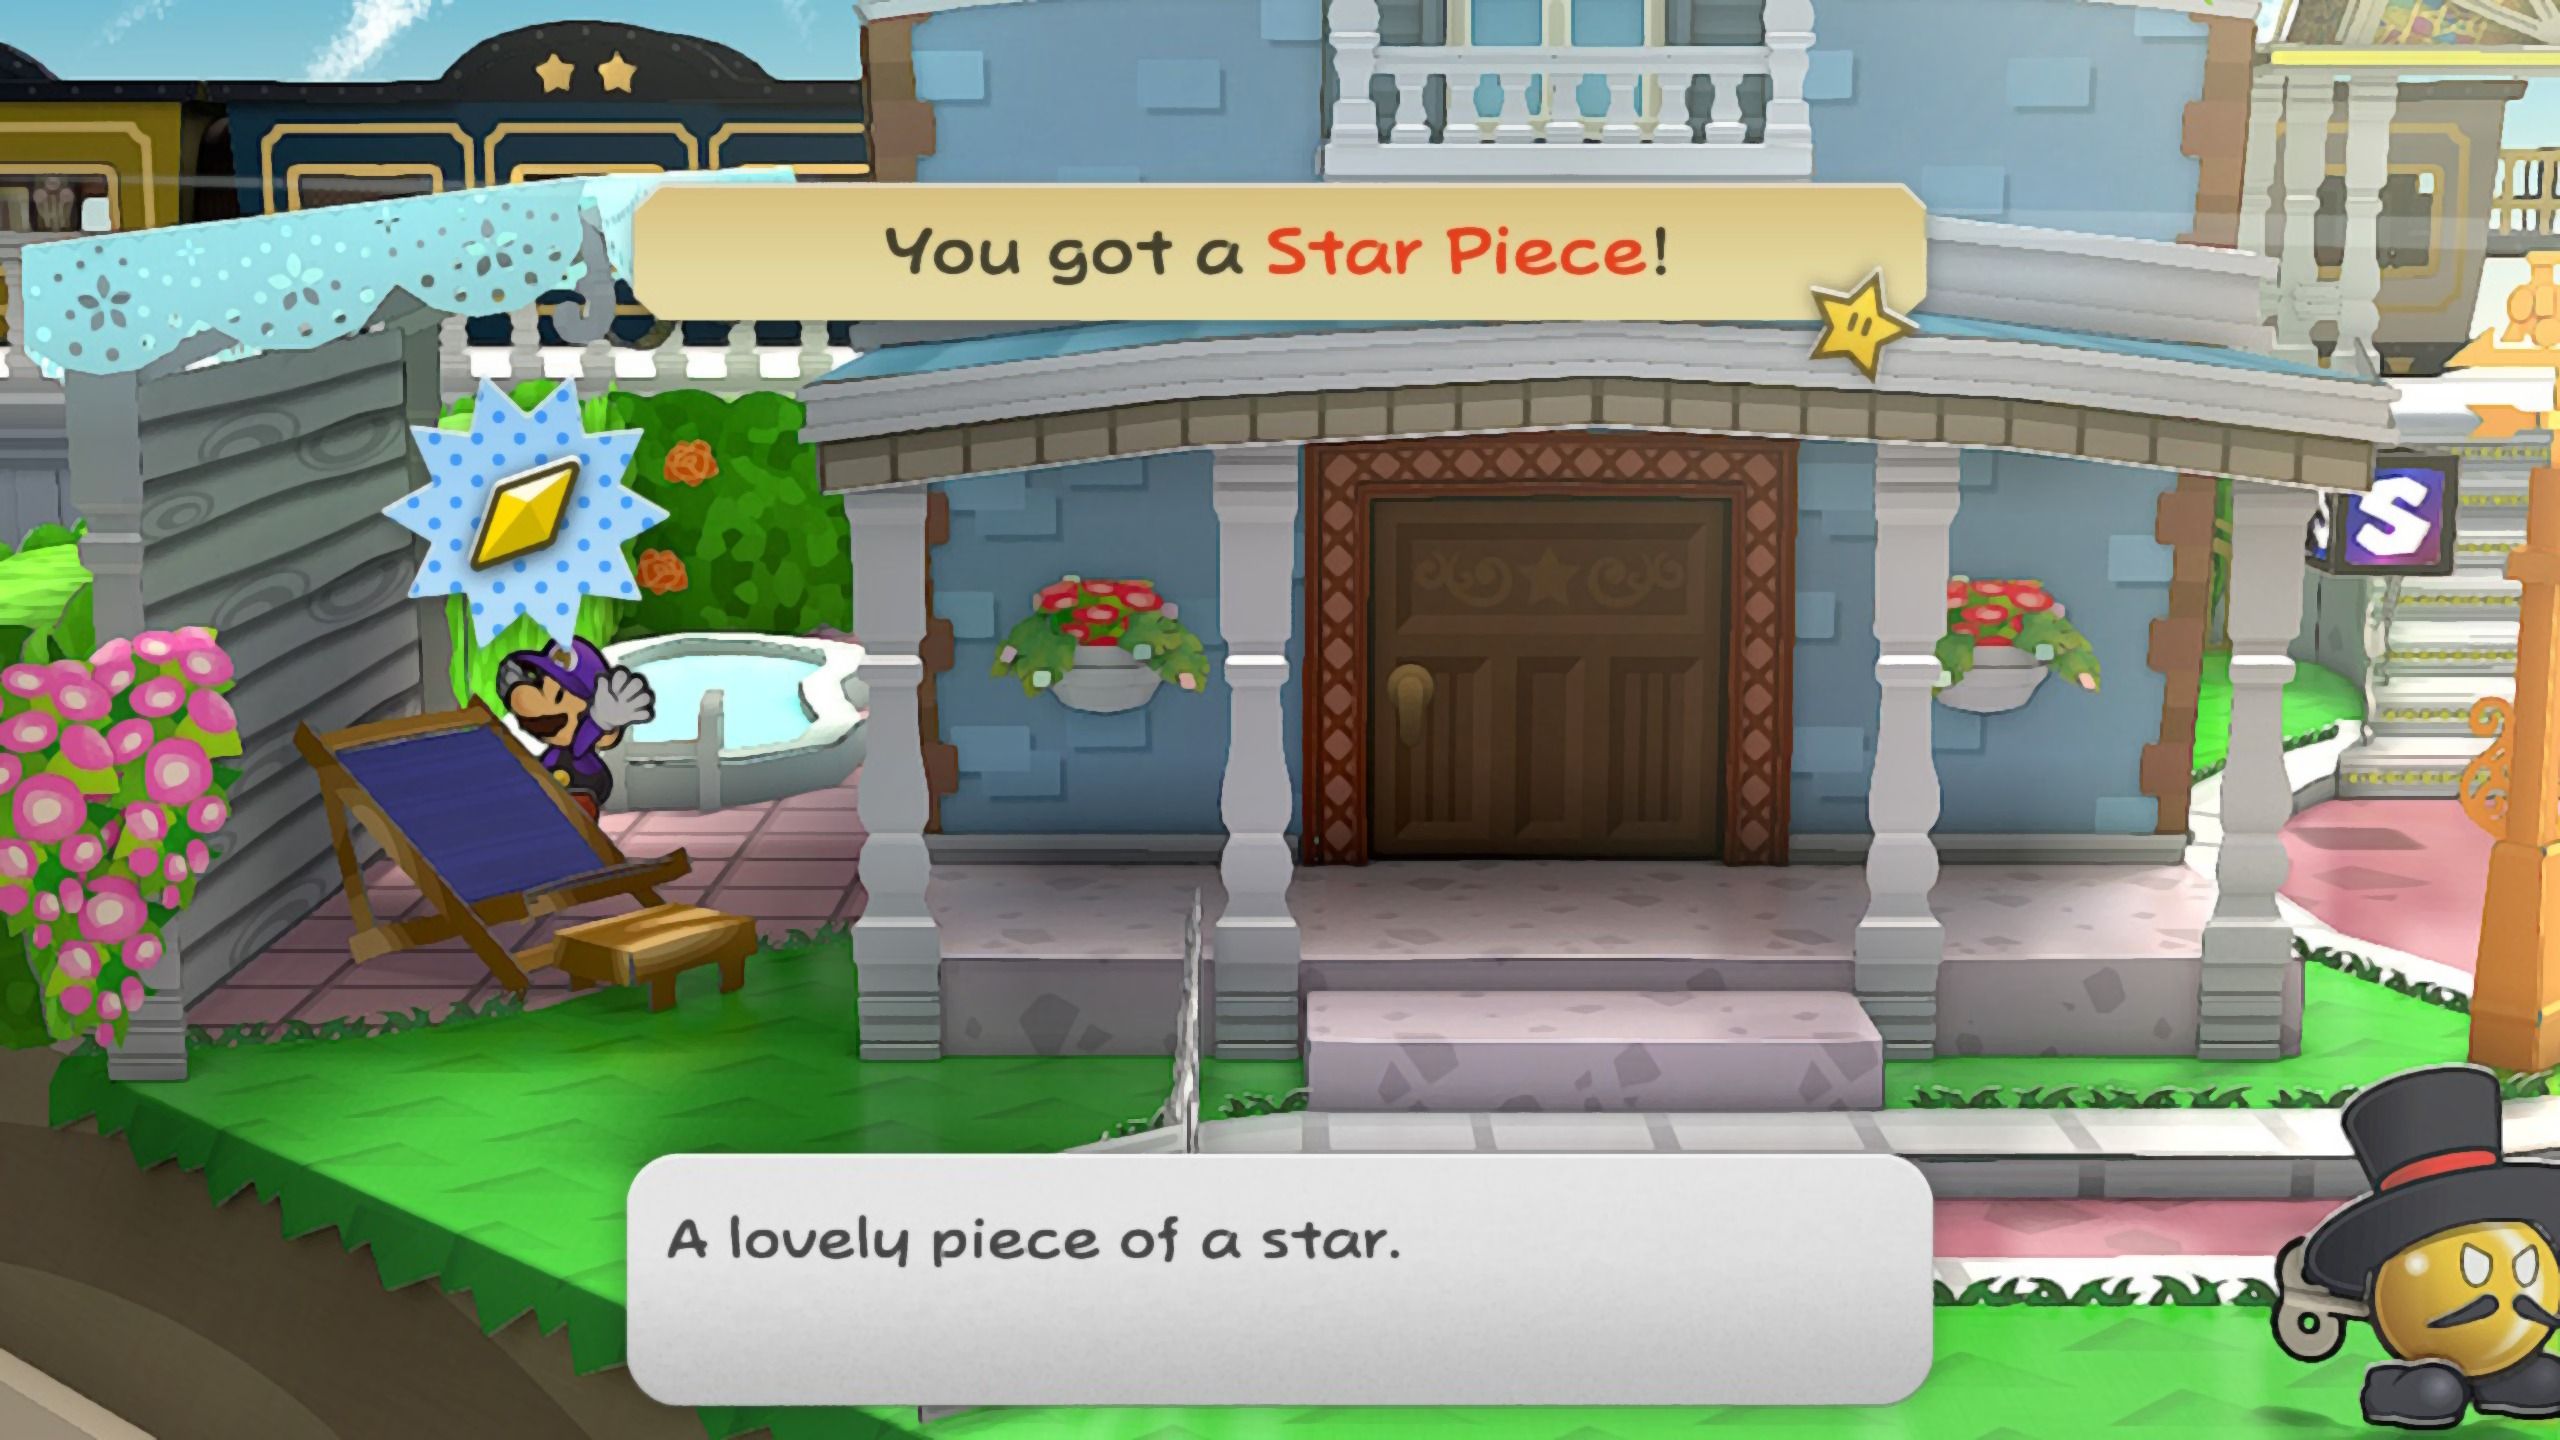 Image of a star piece next to Goldbob's house in Paper Mario TTYD